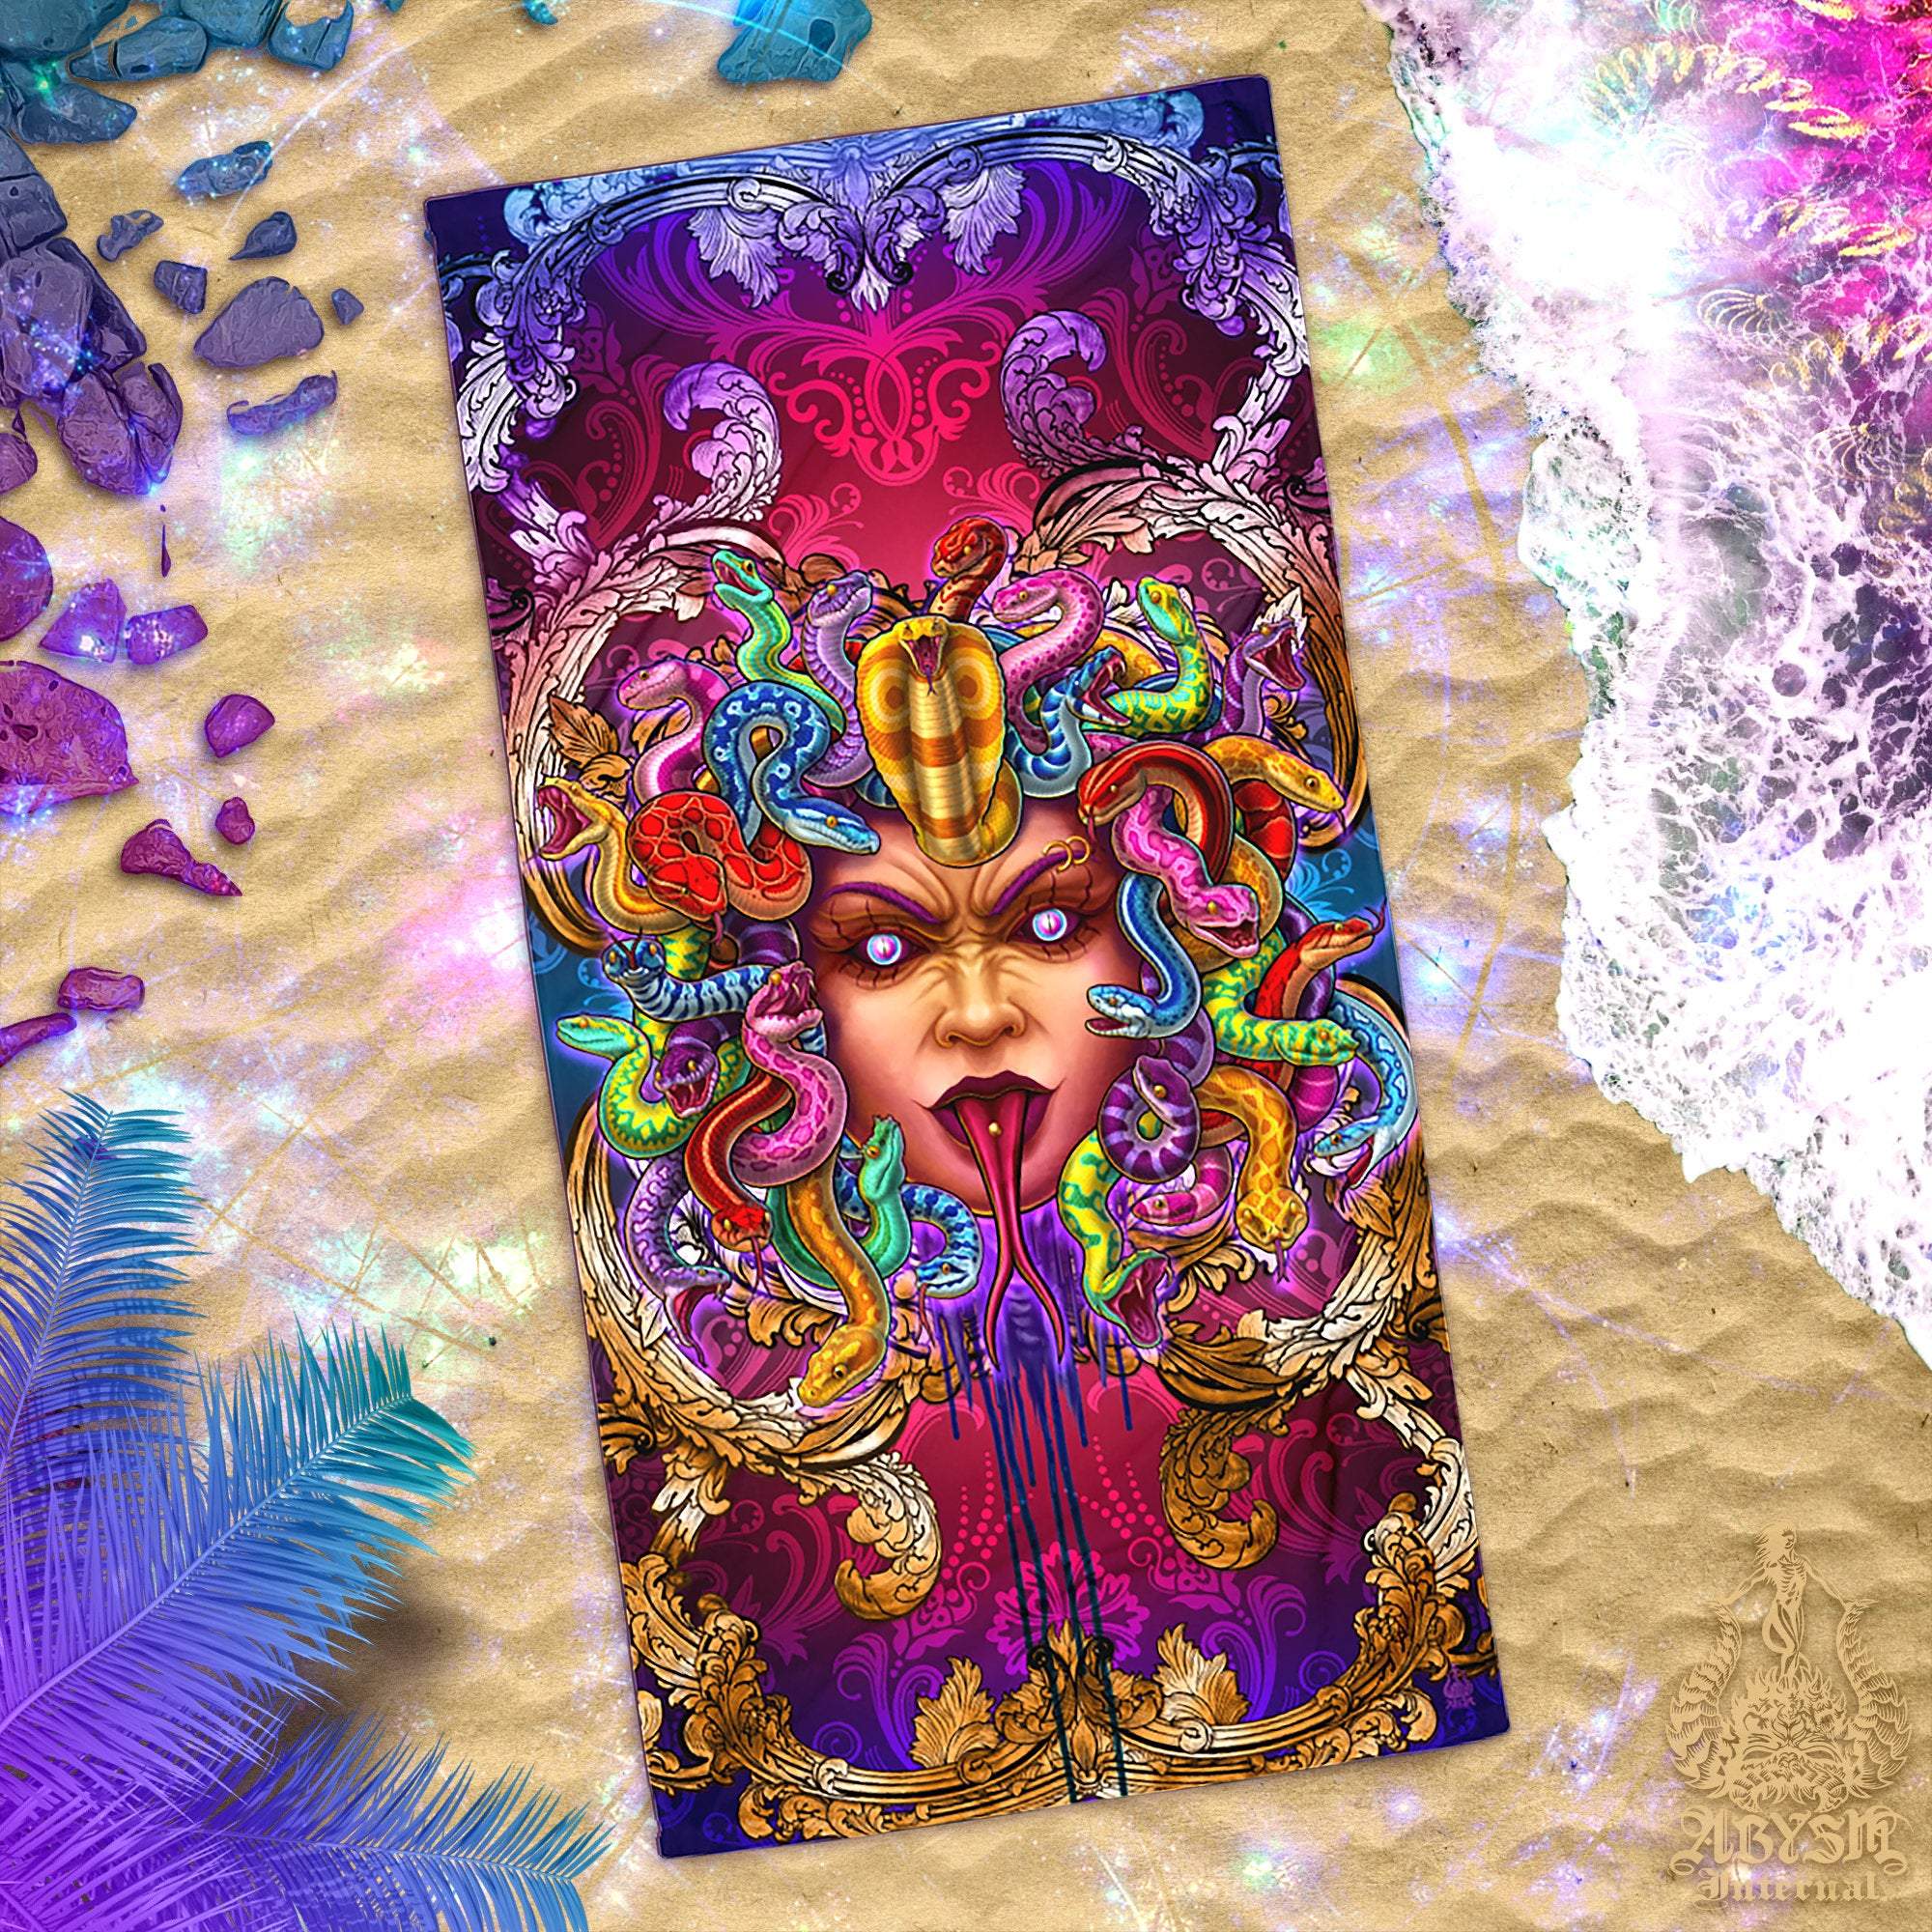 Psychedelic Beach Towel, Psy Medusa, Cool Gift Idea for Gamer Art, Rave Snakes - Abysm Internal